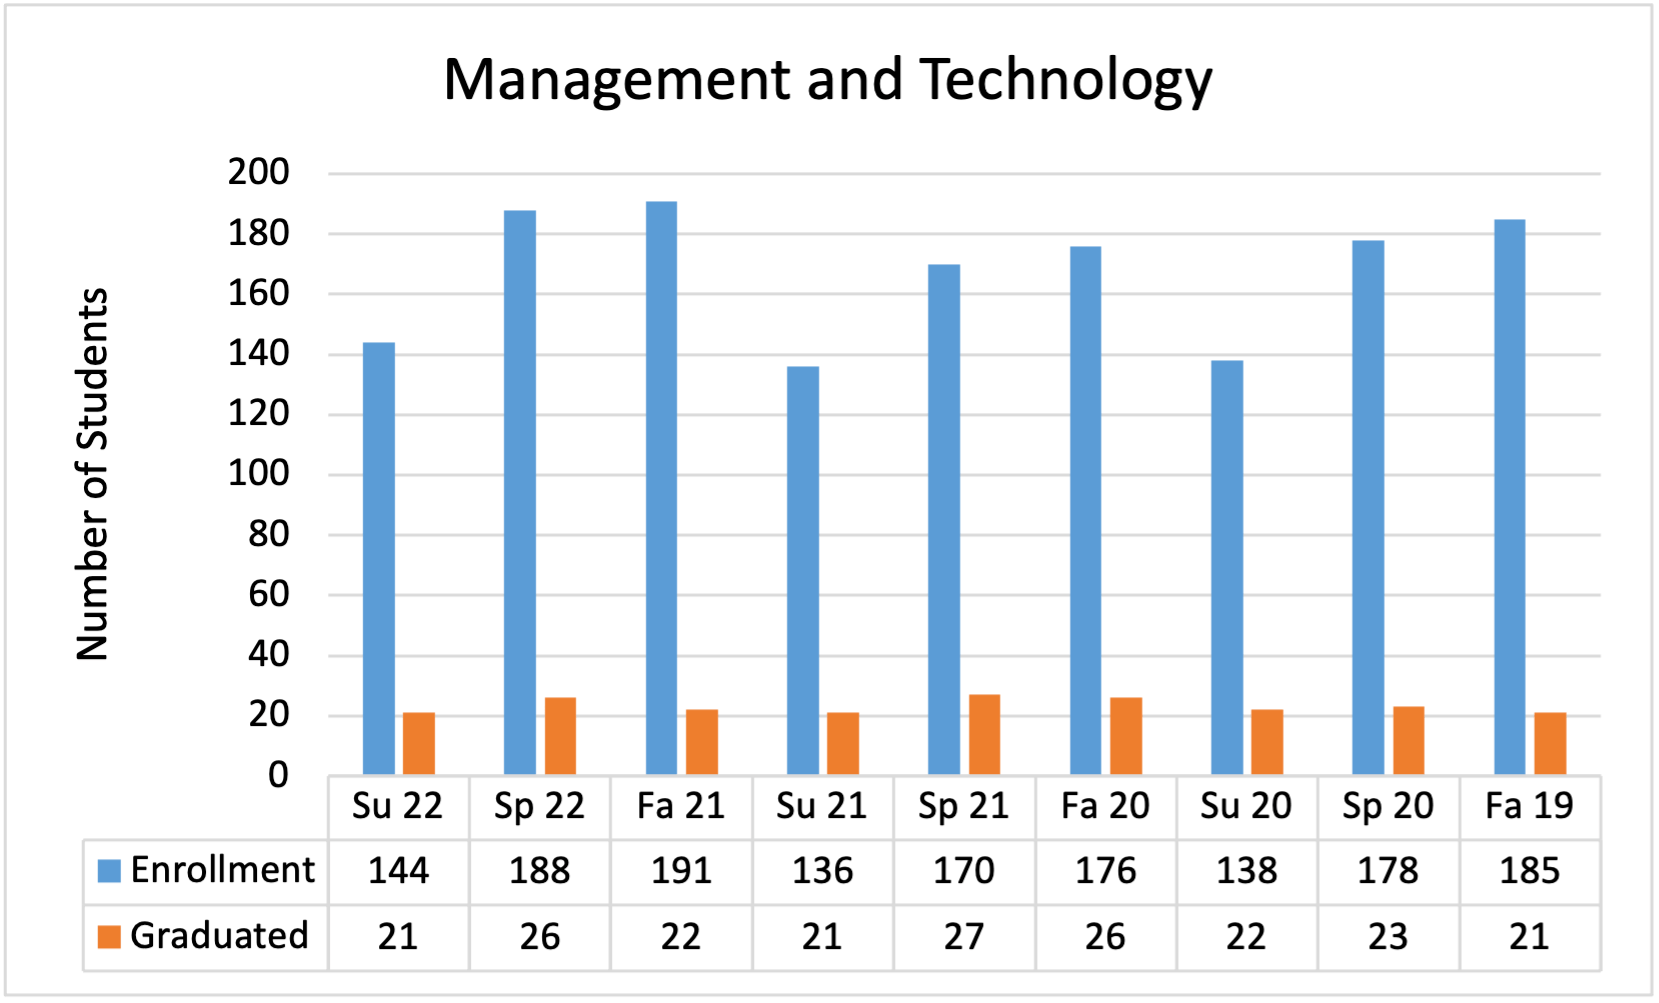 Management and Technology student enrollment and graduation numbers for the past three years